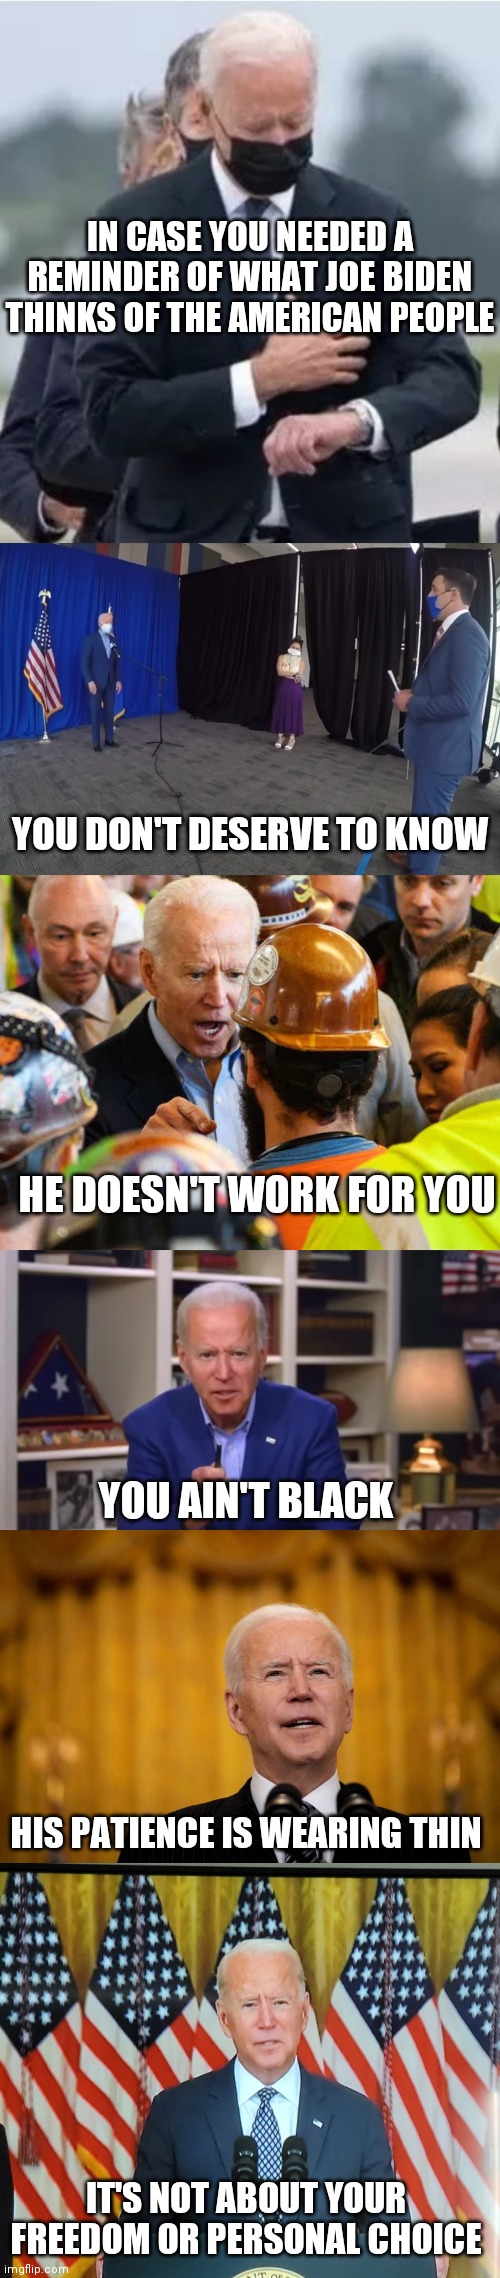 So much Unity | IN CASE YOU NEEDED A REMINDER OF WHAT JOE BIDEN THINKS OF THE AMERICAN PEOPLE; YOU DON'T DESERVE TO KNOW; HE DOESN'T WORK FOR YOU; YOU AIN'T BLACK; HIS PATIENCE IS WEARING THIN; IT'S NOT ABOUT YOUR FREEDOM OR PERSONAL CHOICE | image tagged in biden watch,biden i'm not working for you,biden you ain't black,joe biden speech,afghan address | made w/ Imgflip meme maker